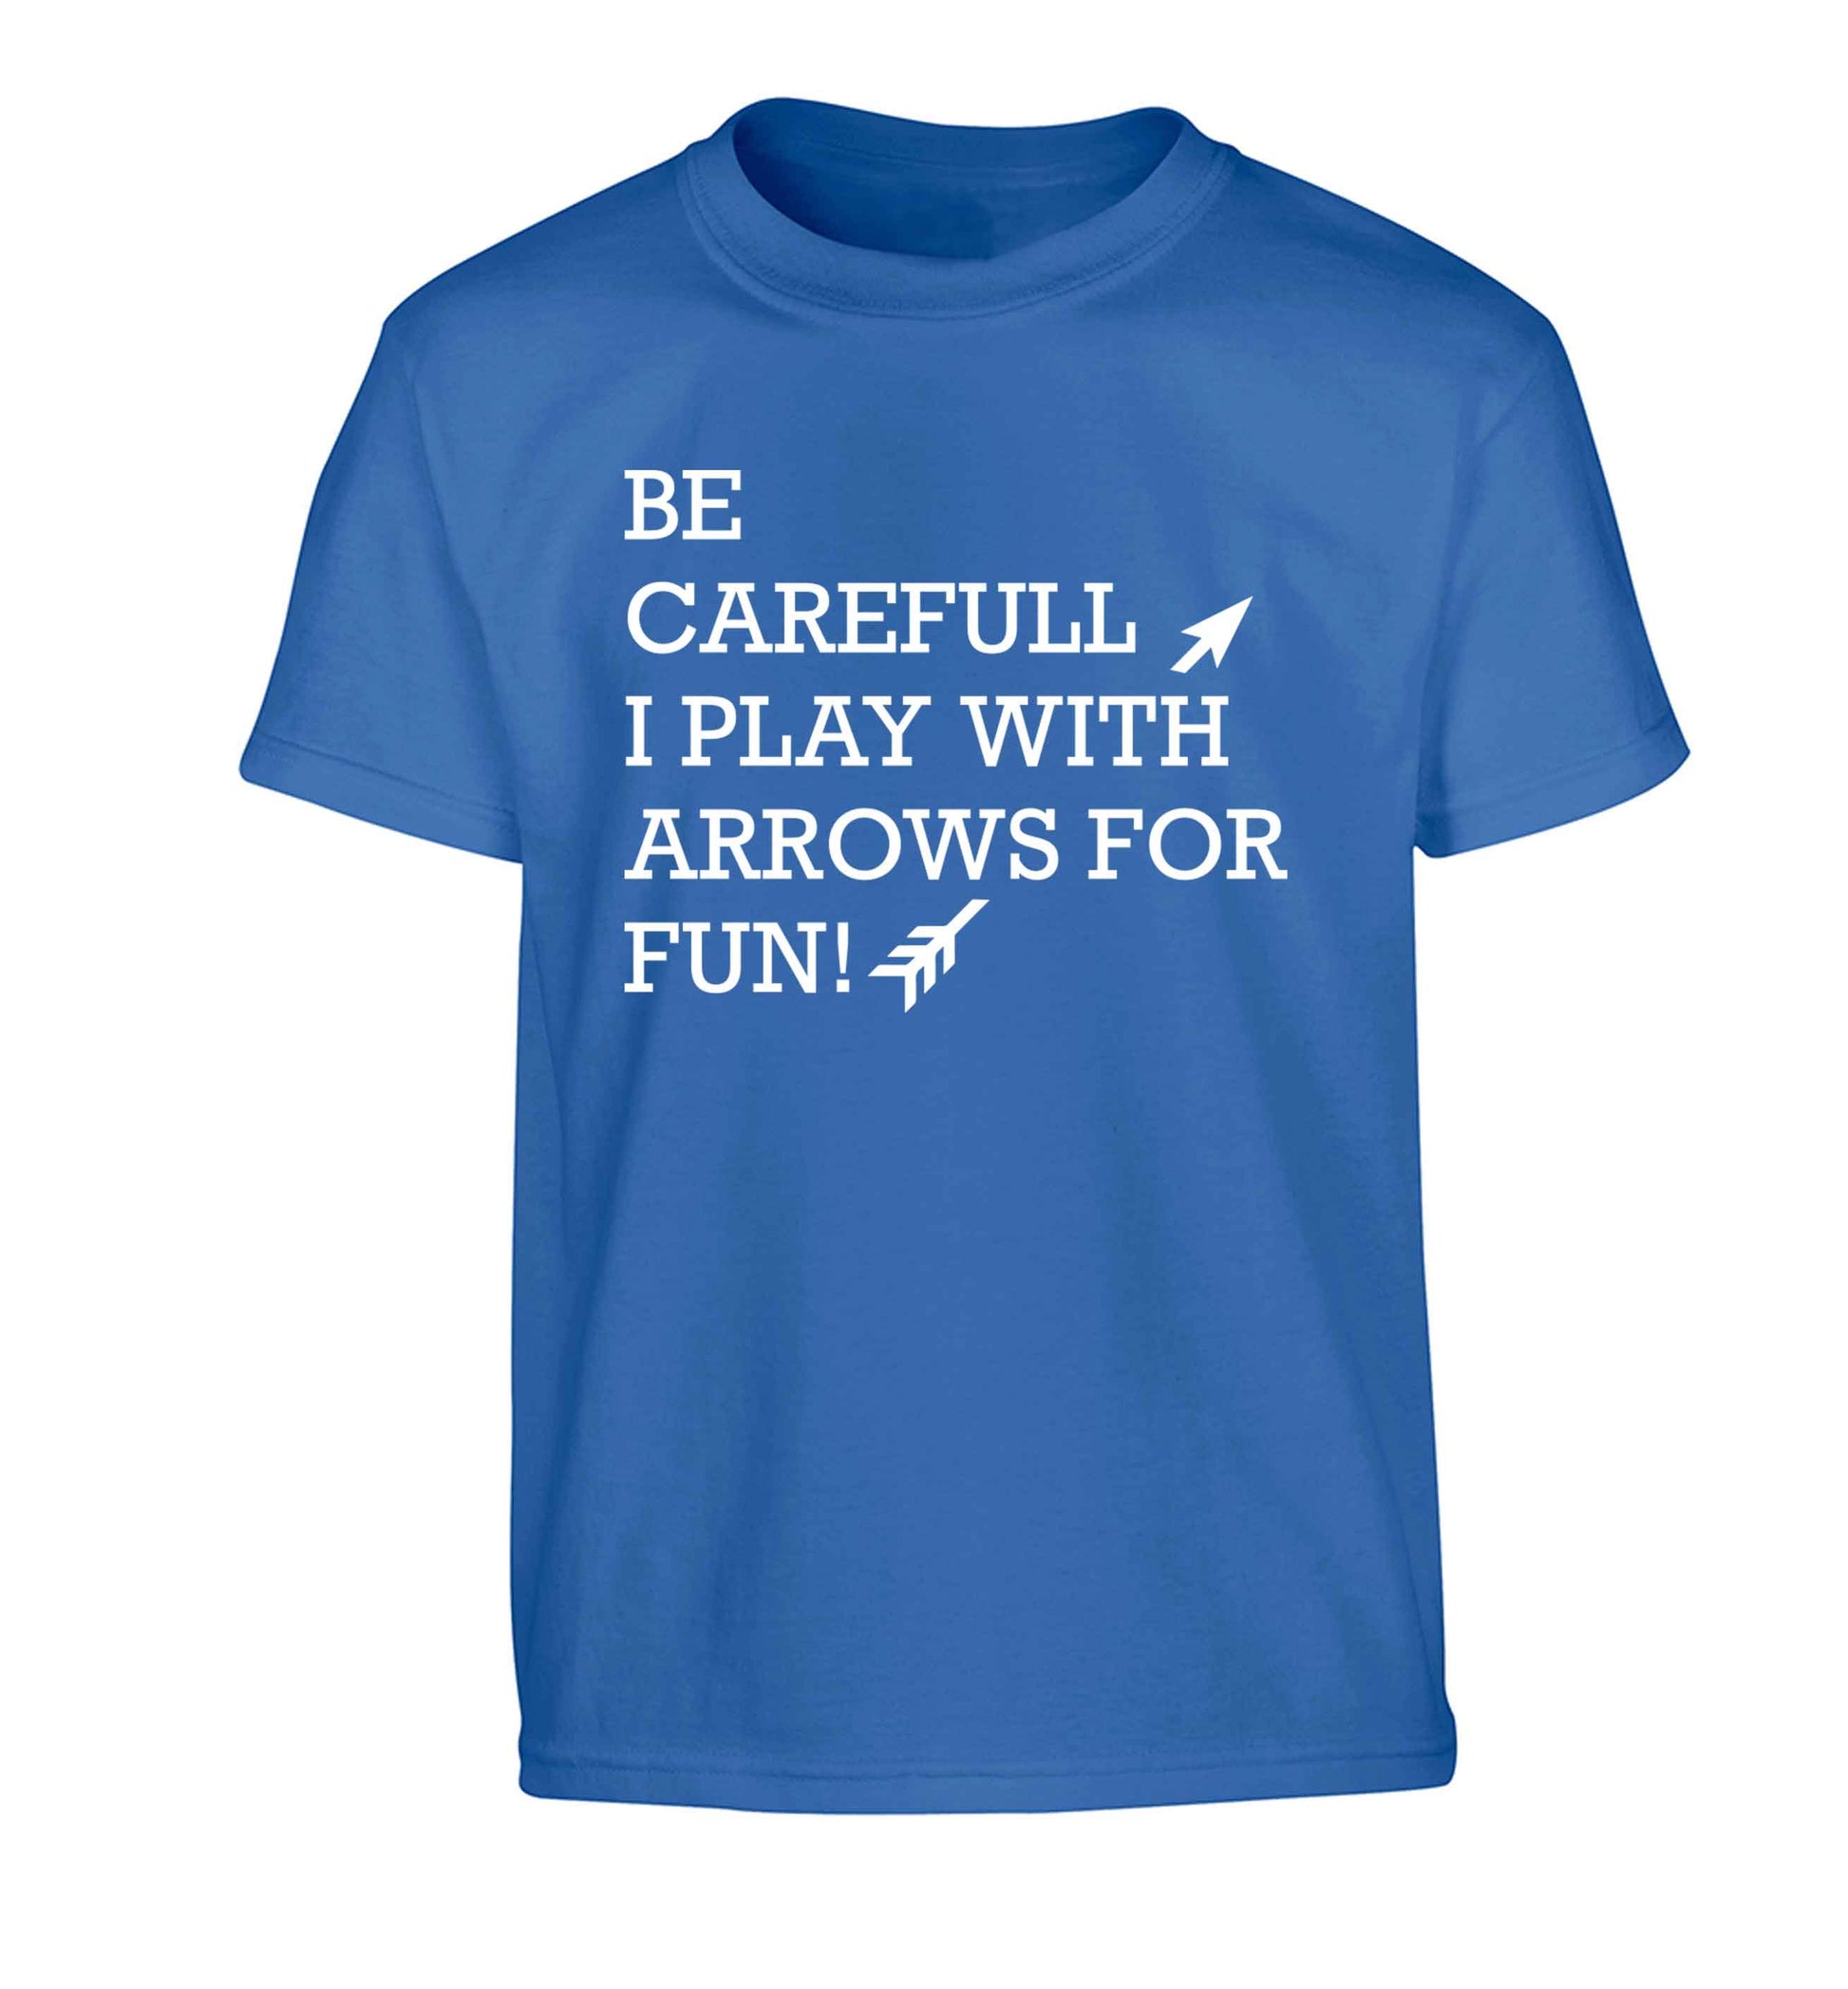 Be carefull I play with arrows for fun Children's blue Tshirt 12-13 Years